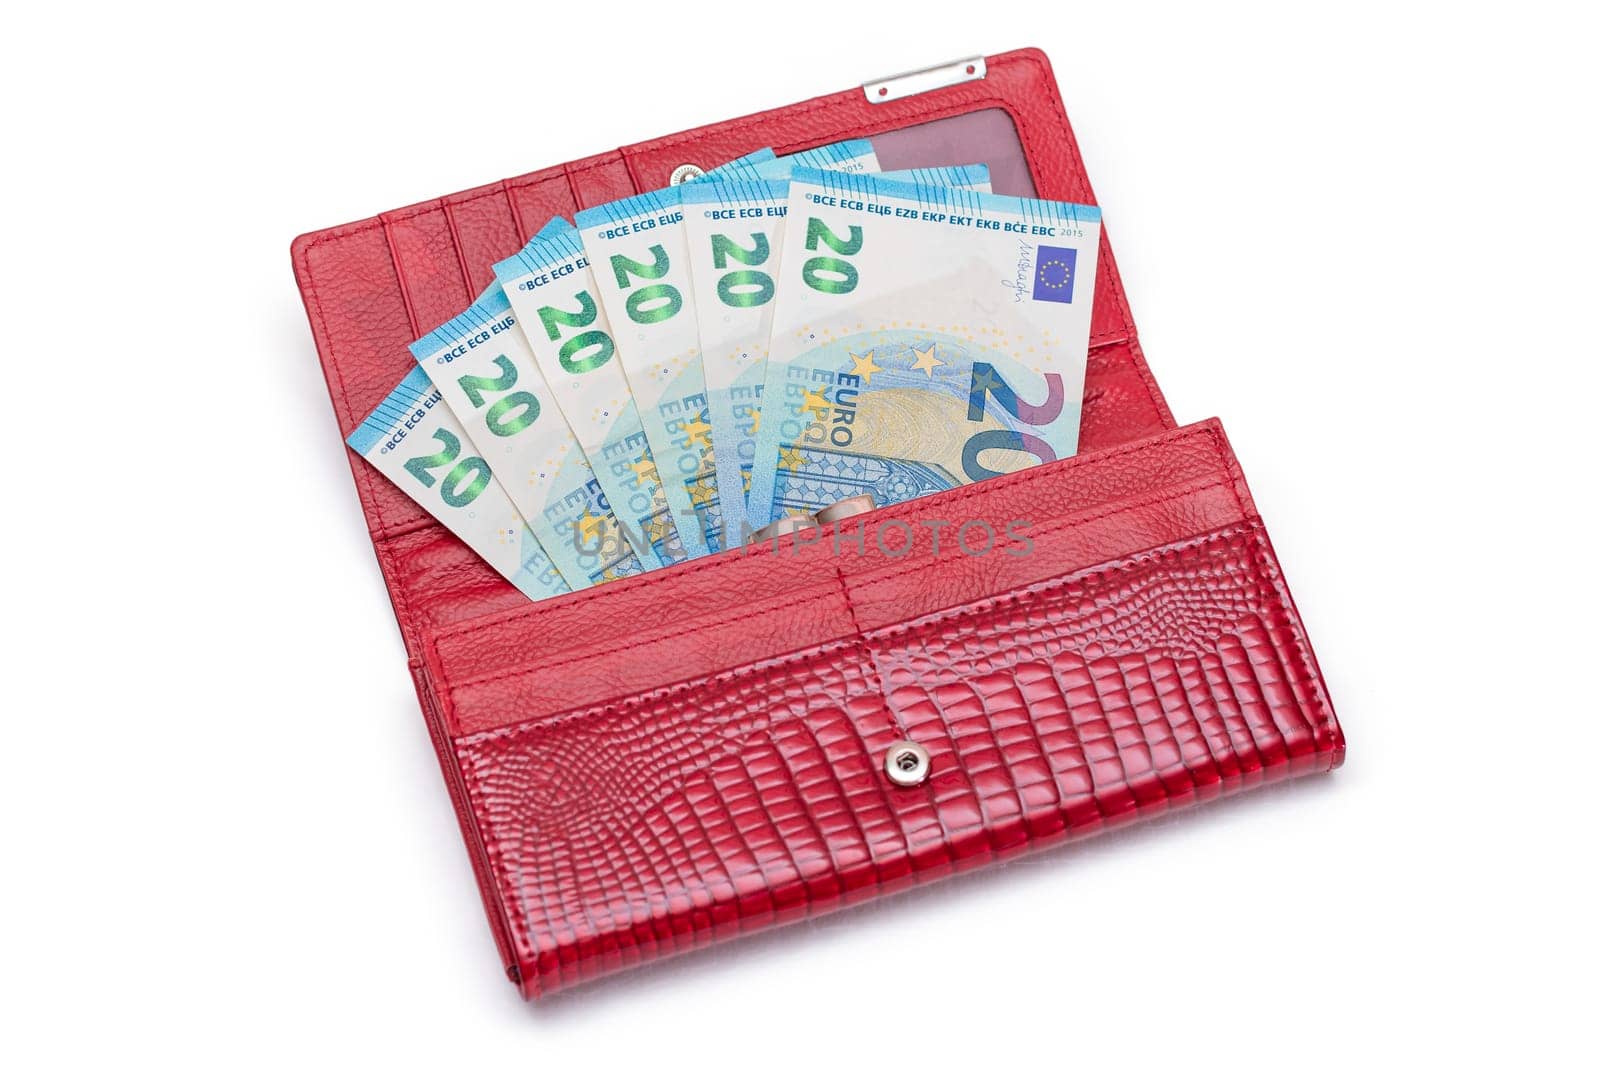 Opened Red Women Purse with 20 Euro Banknotes Inside - Isolated on White Background. A Wallet Full of Money Symbolizing Wealth, Success, Shopping and Social Status - Isolation